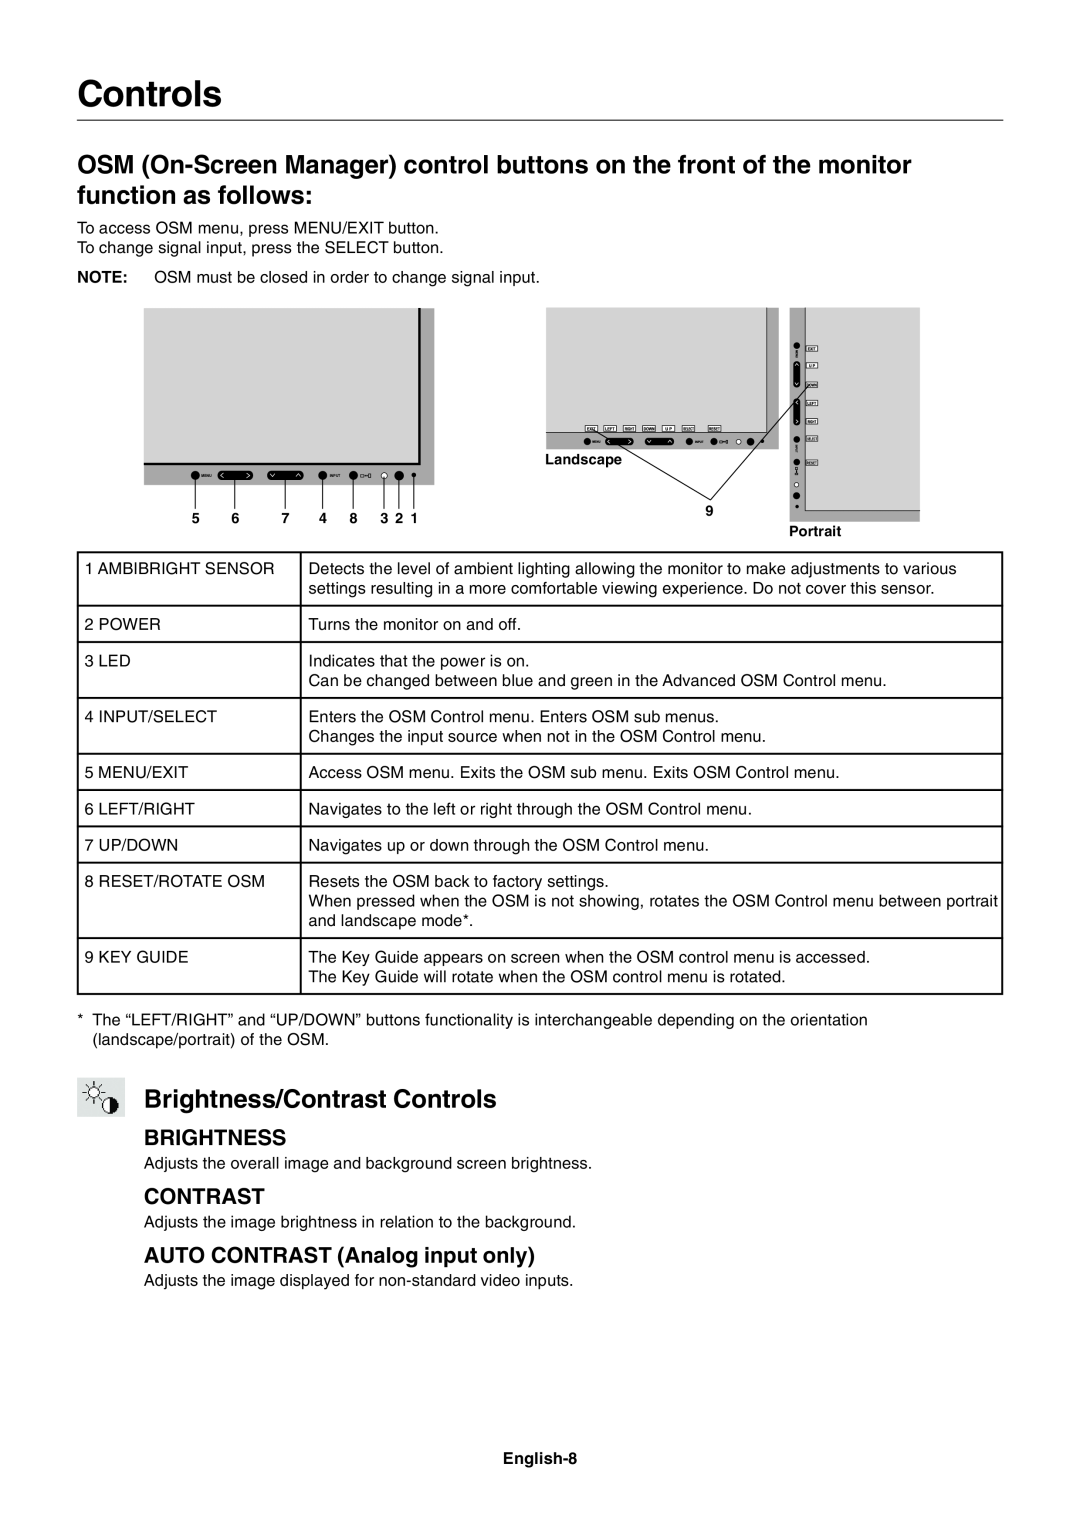 NEC LCD1990FXp user manual Brightness/Contrast Controls, AUTO CONTRAST Analog input only 